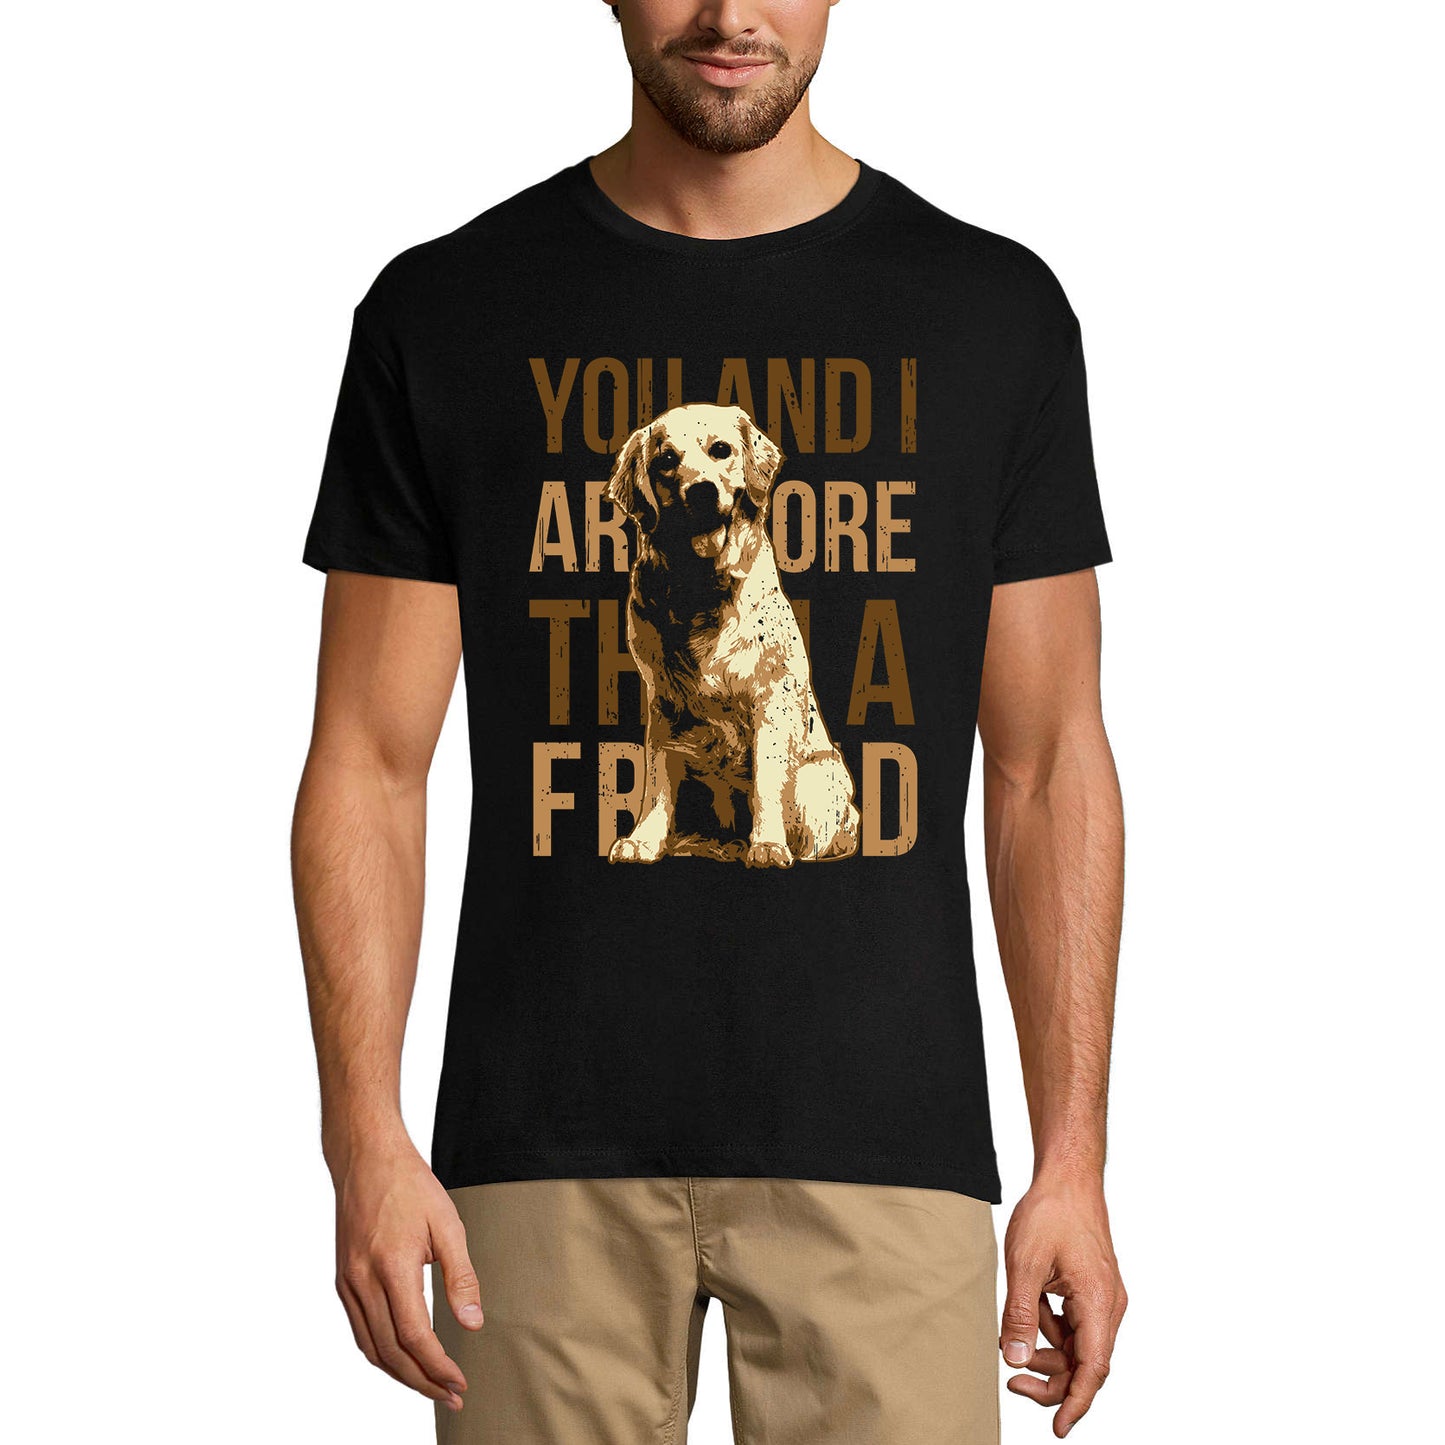 ULTRABASIC Men's Graphic T-Shirt You And I Are More Than a Friend - Dog Shirt